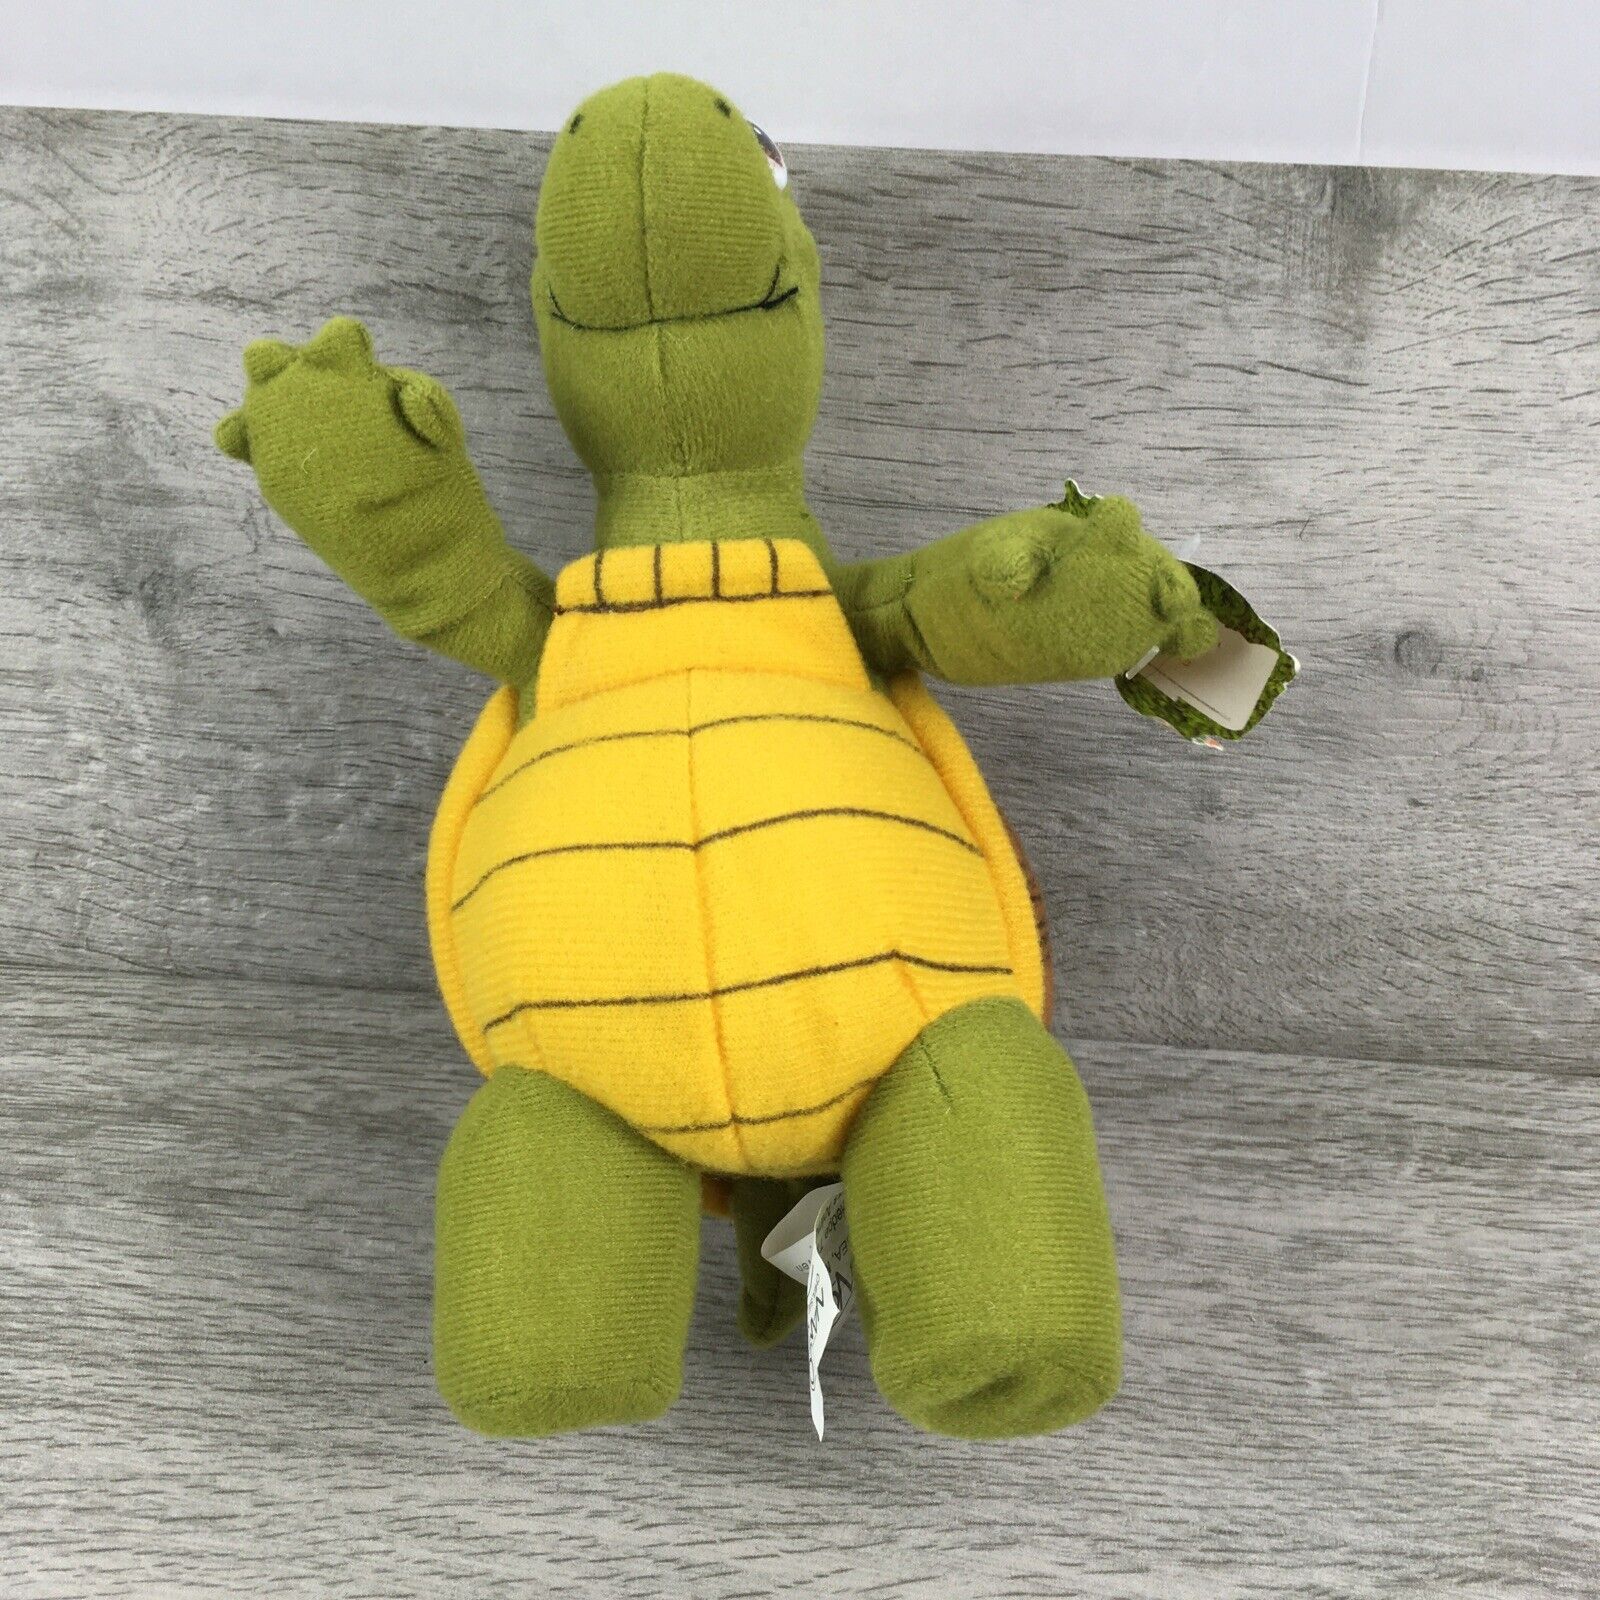 Over the Hedge 7” VERNE the TURTLE Plush Stuffed Toy - With Tag NANCO 2006